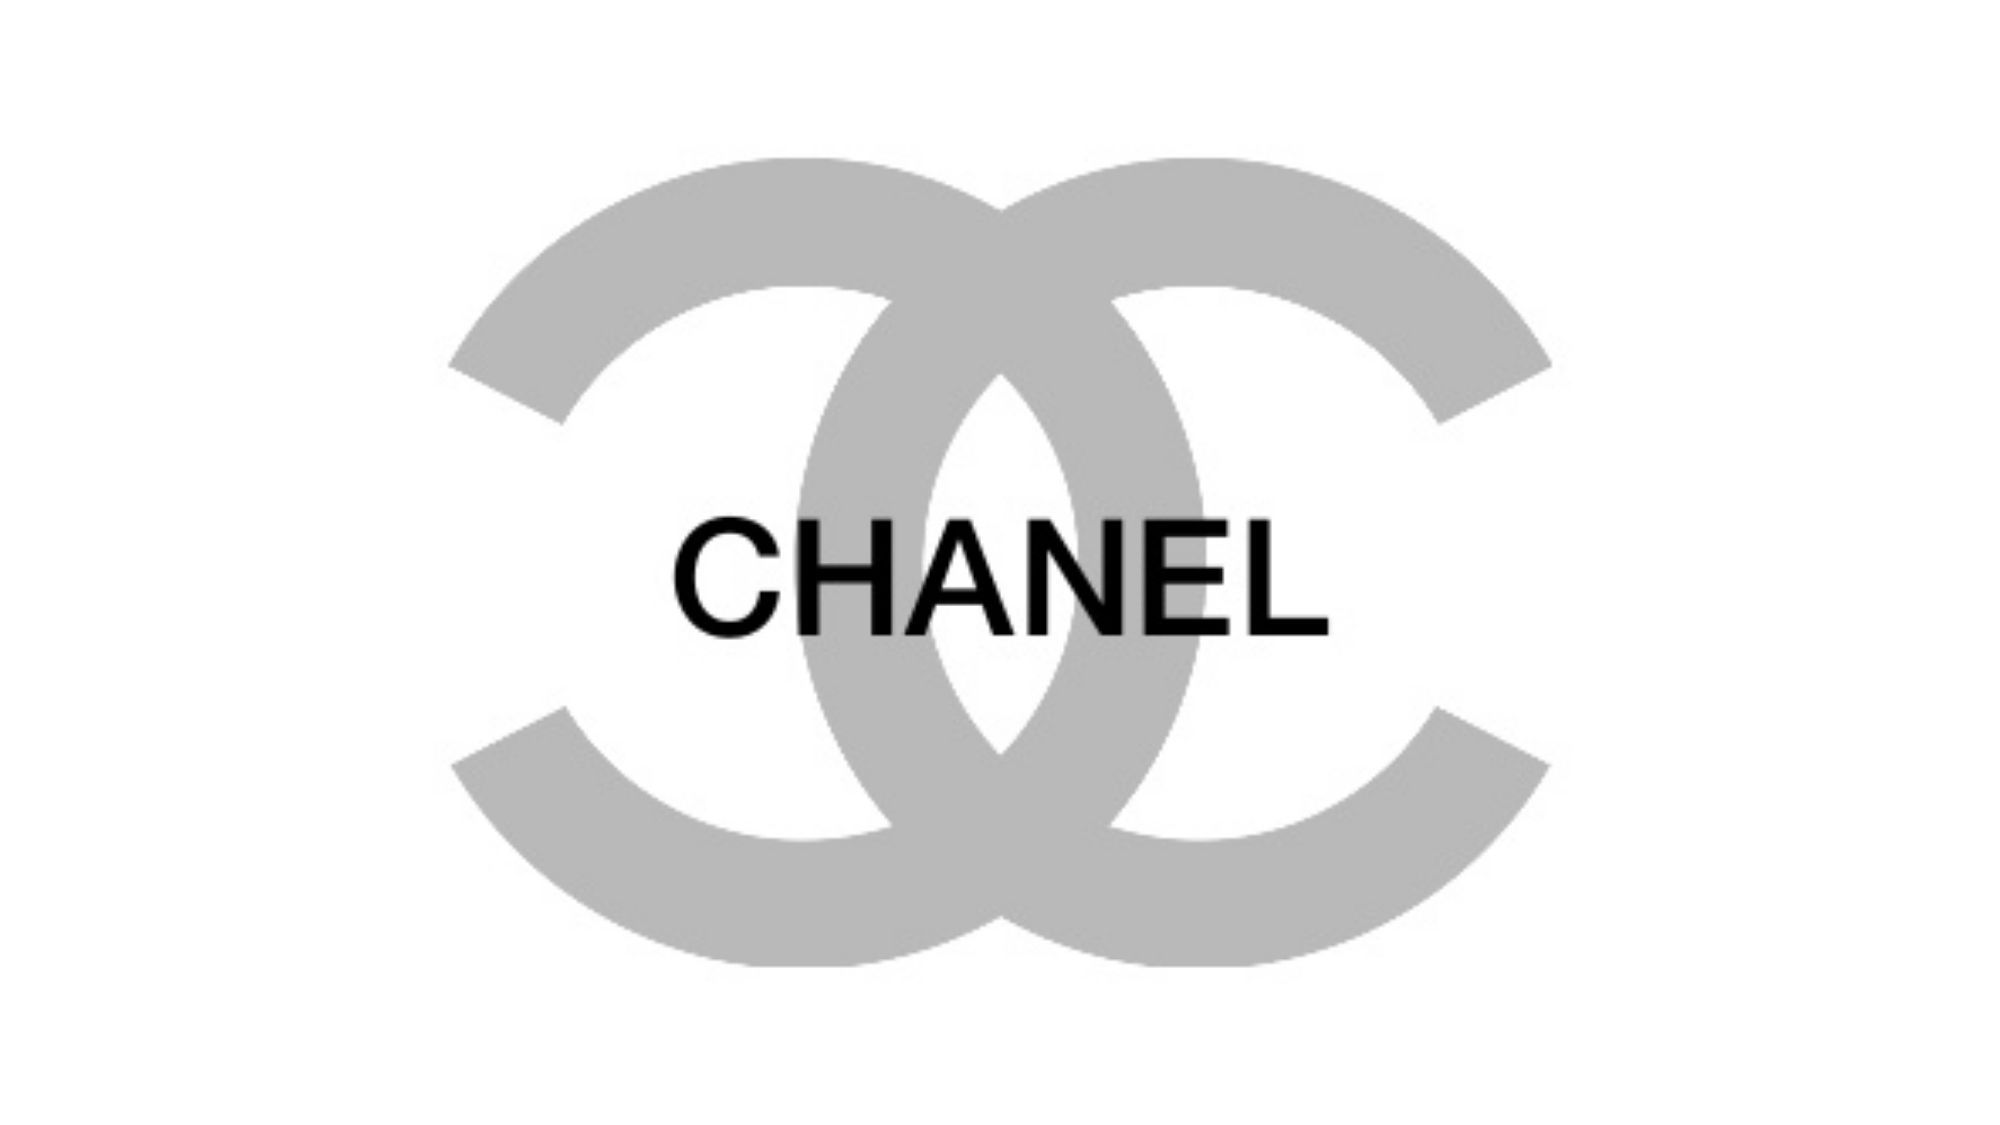 Battle of the curves: Huawei wins dispute over Chanel logo